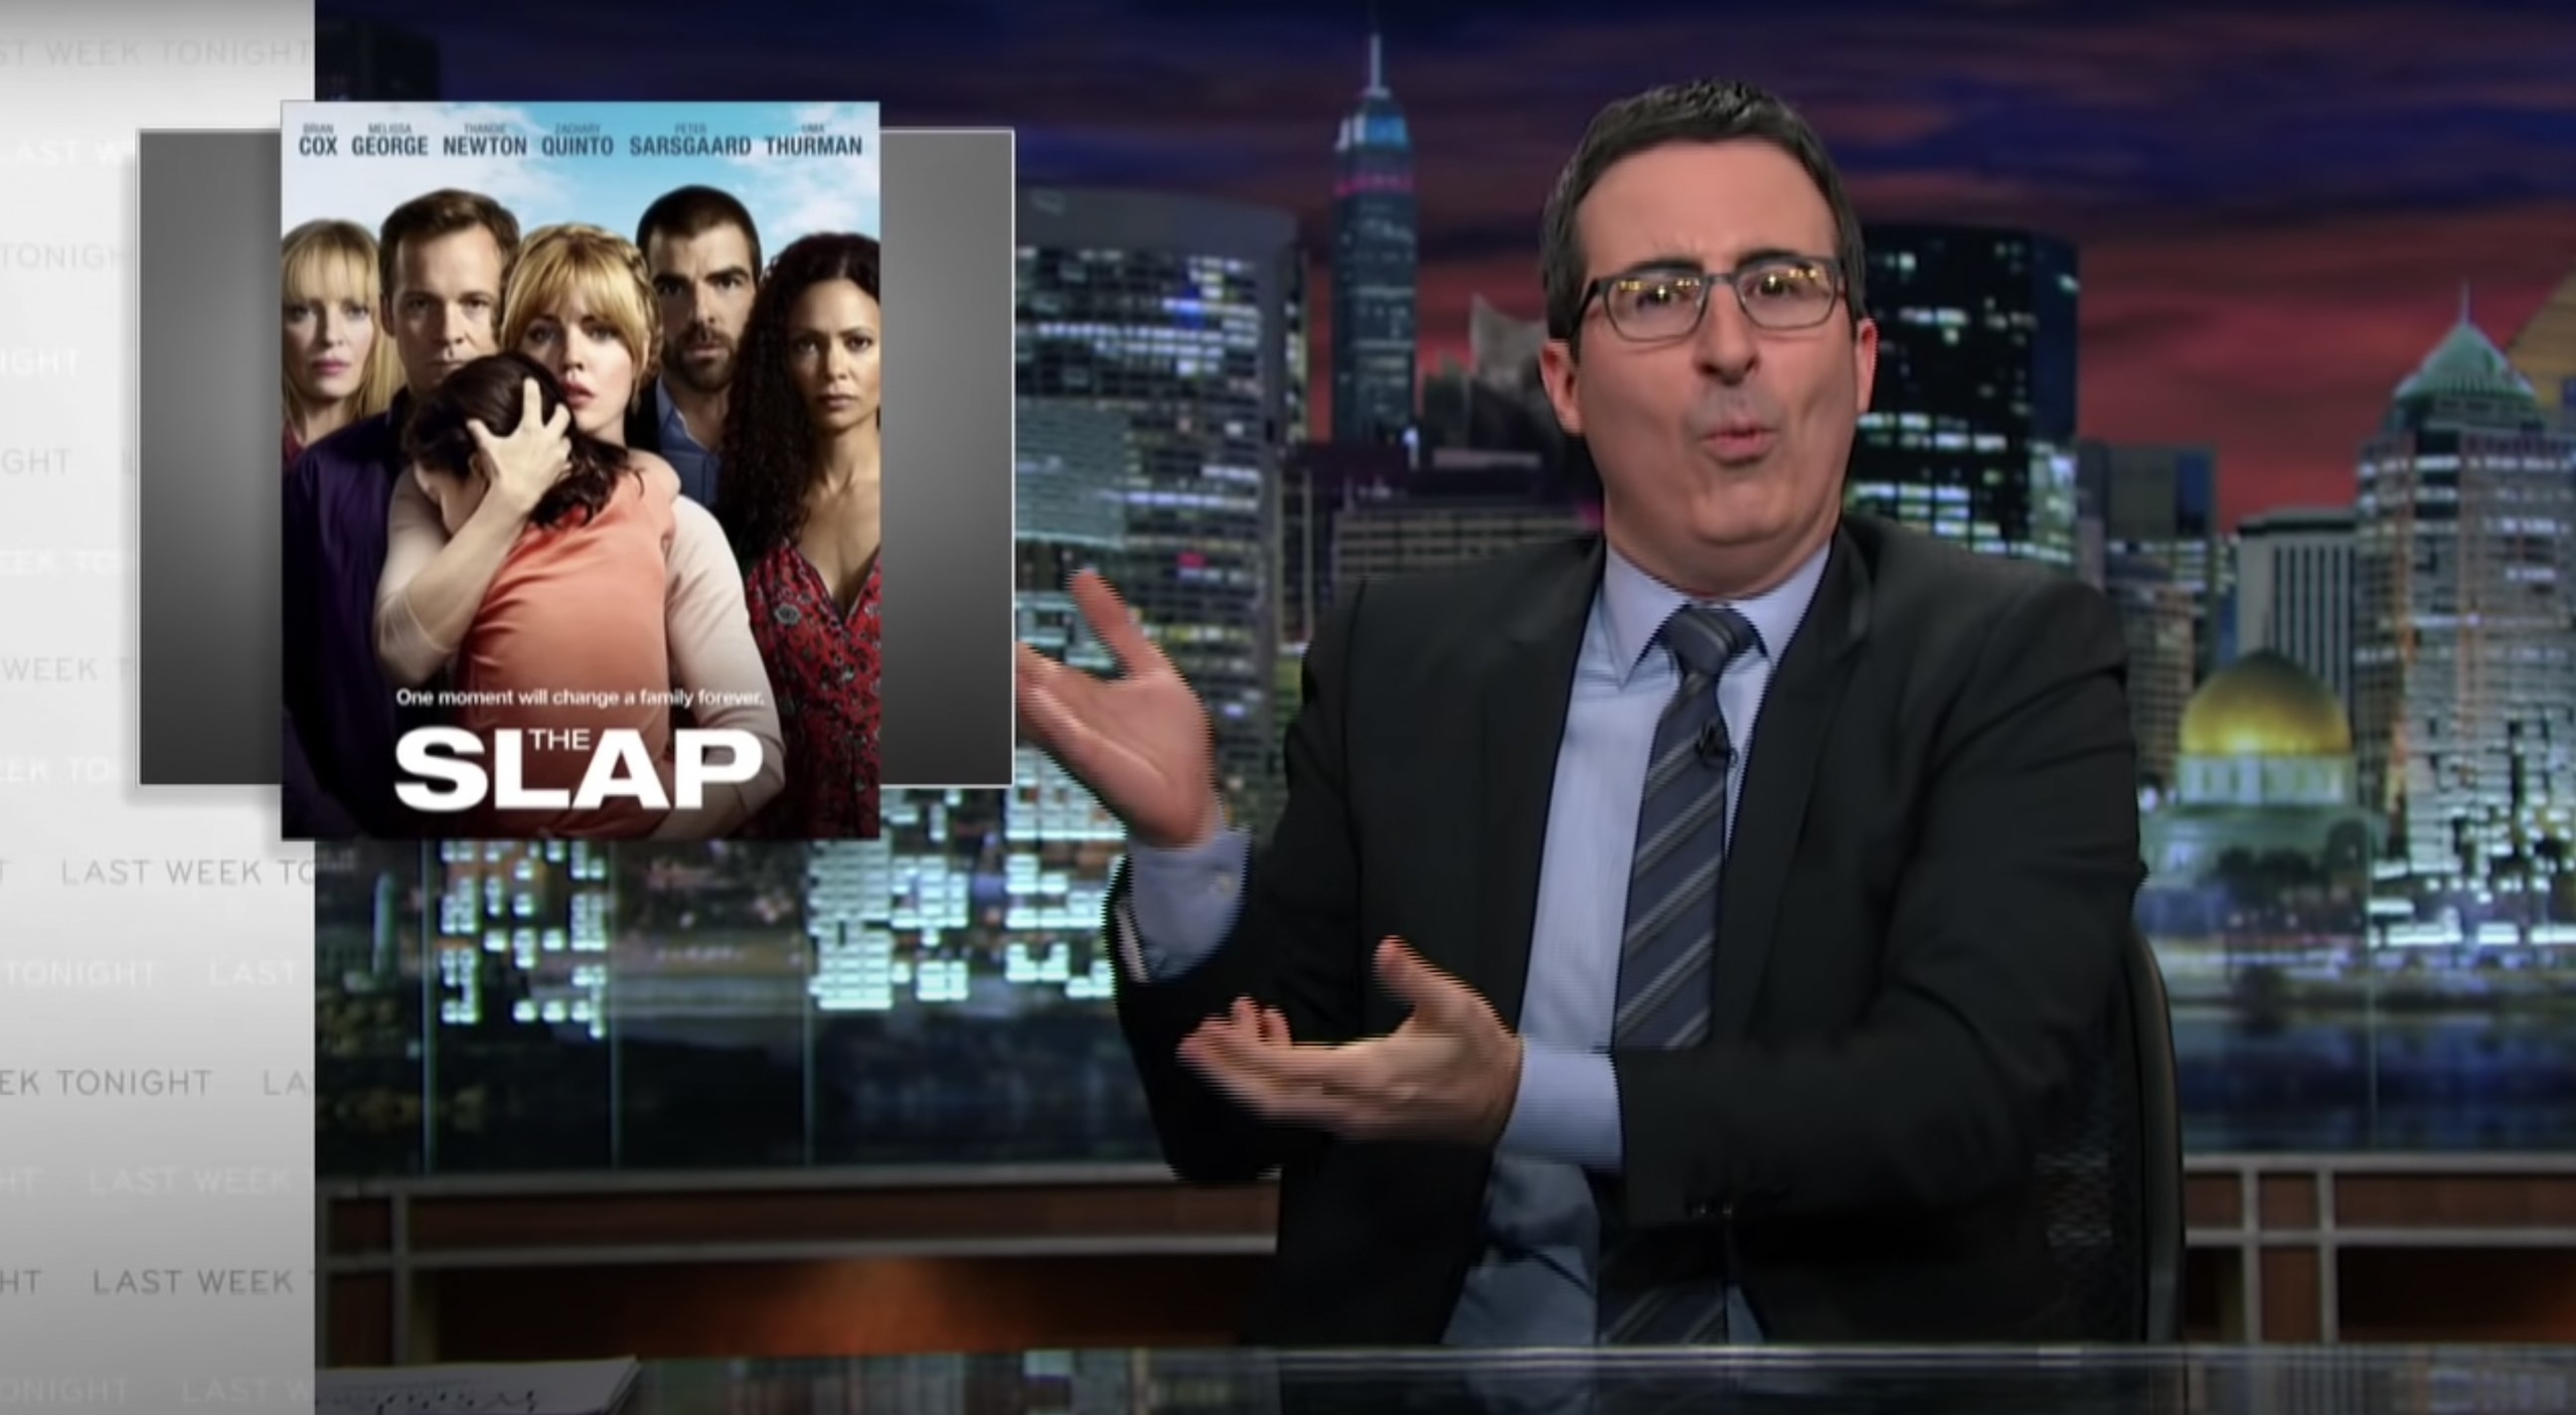 John Oliver at his desk, gesturing in confusion to an image of the tv show The Slap